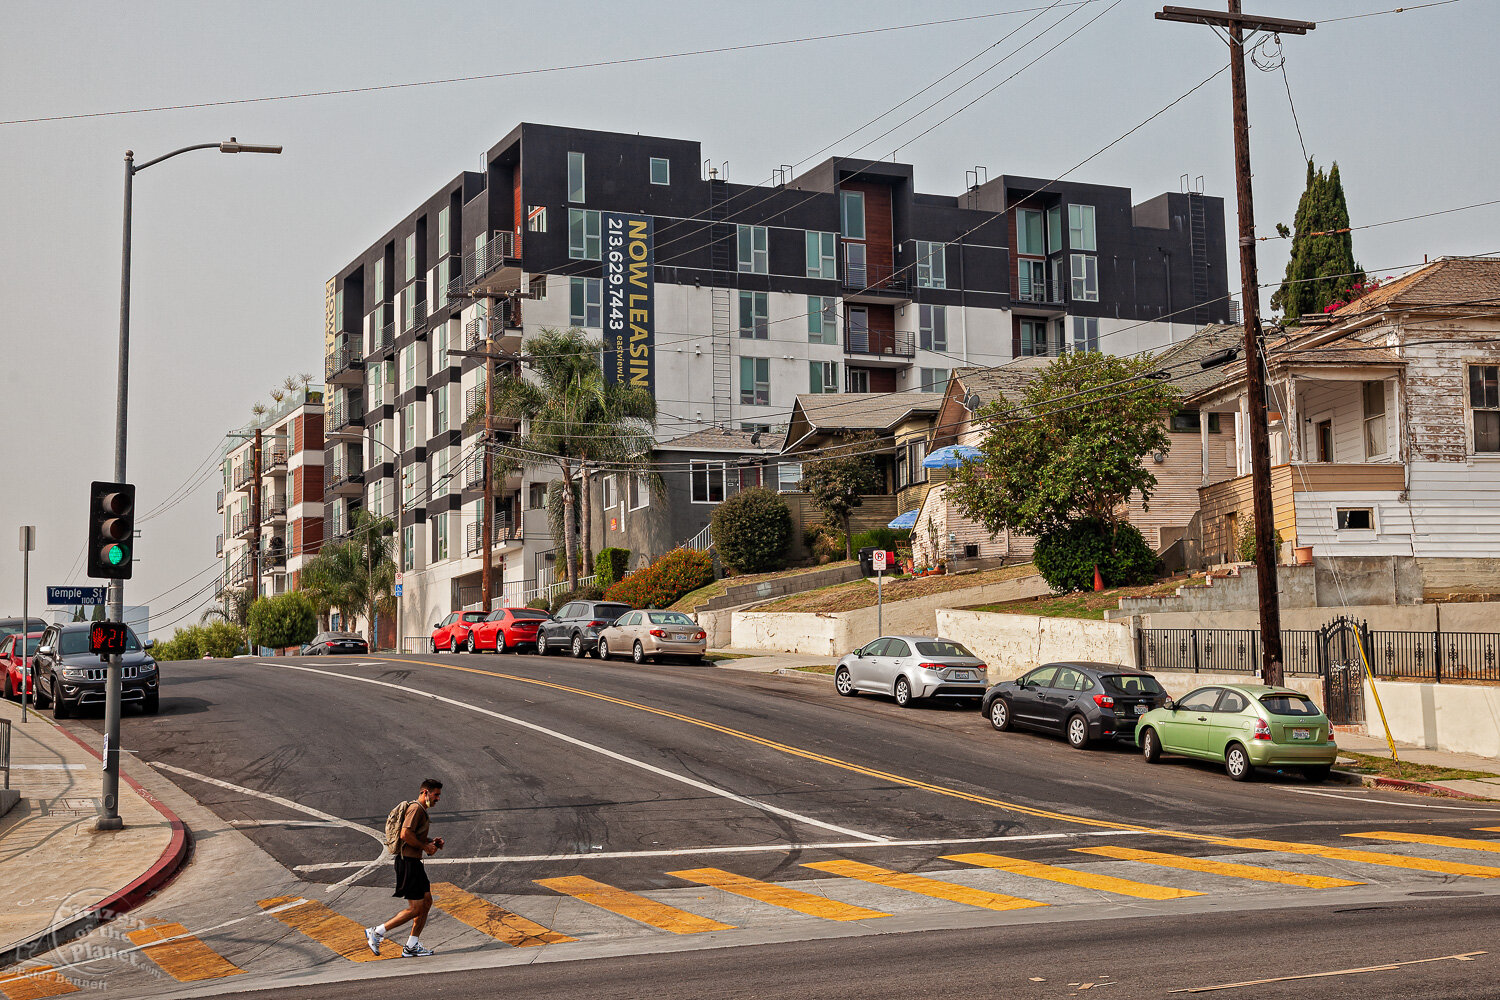  A “Now Leasing” sign hangs from a recently constructed multi-unit residential development along Boylston Street next to some of the original single-family homes common to the area. Vista Hermosa is a neighborhood near downtown Los Angeles that sits 